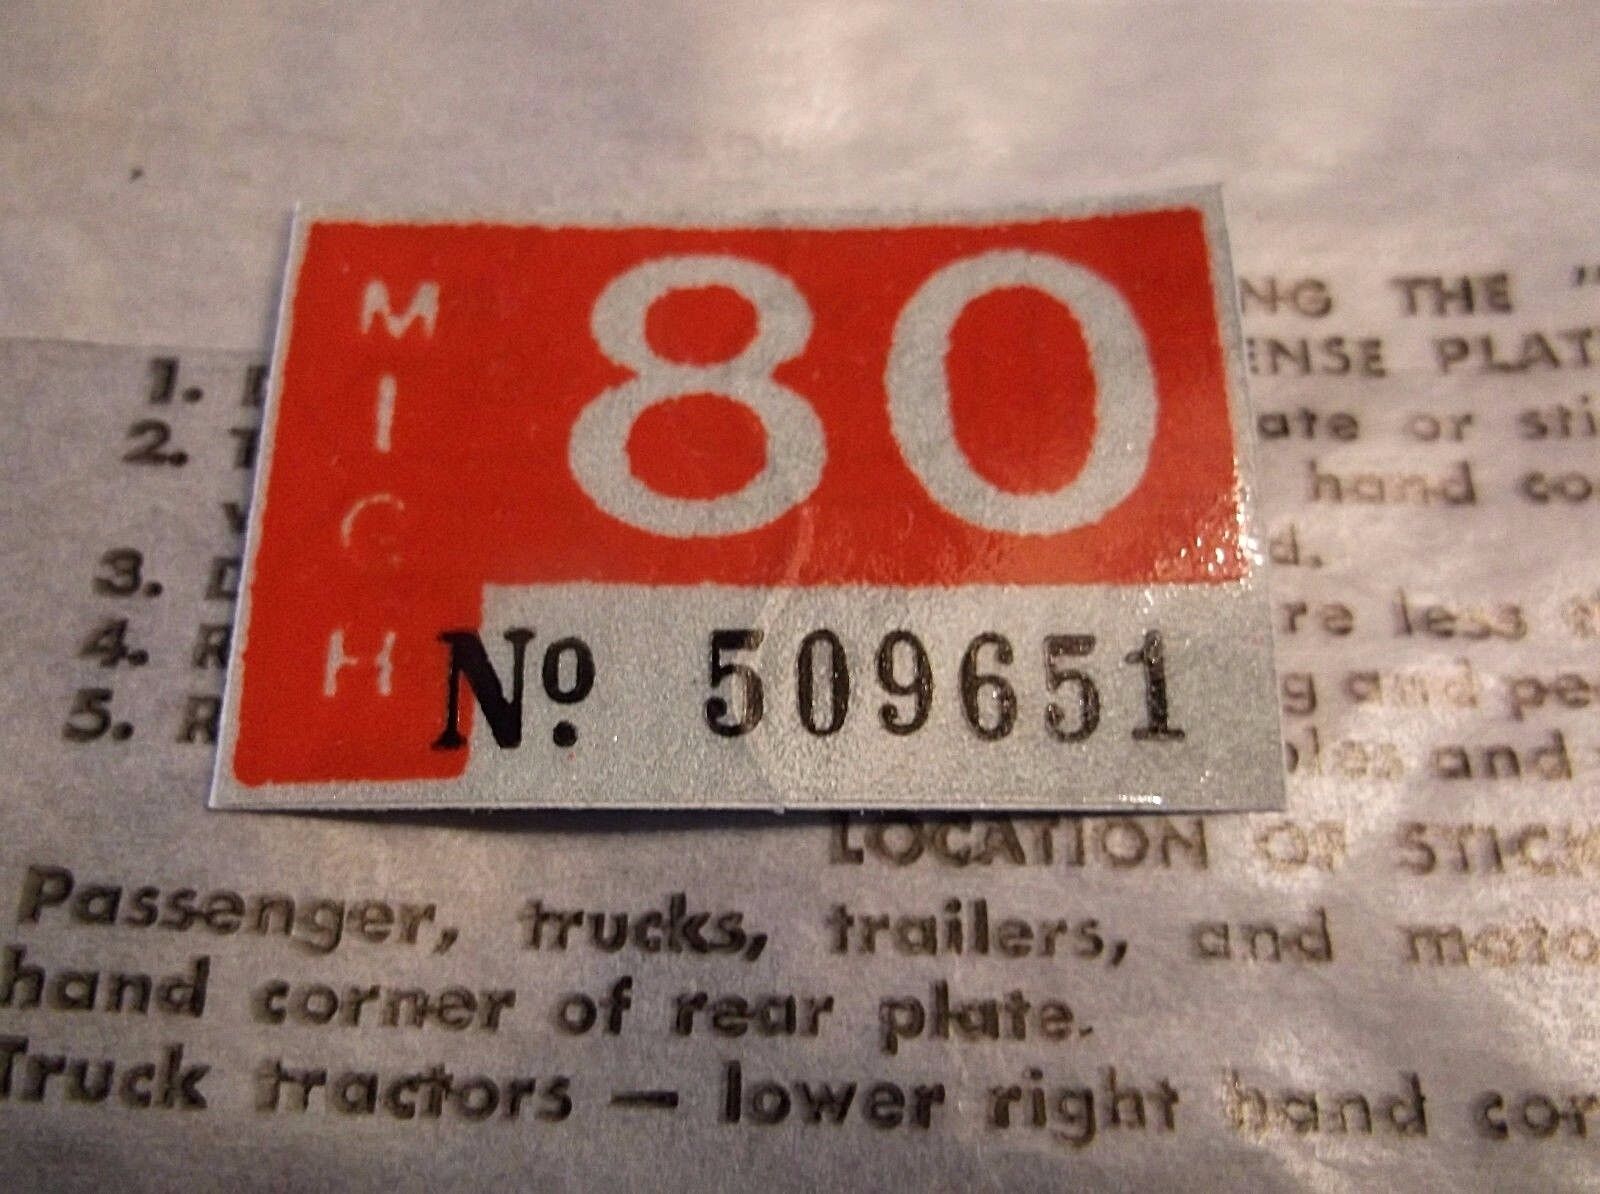 1980 Michigan License Plate Registration Tab Sticker New Old Stock Motorcycle 